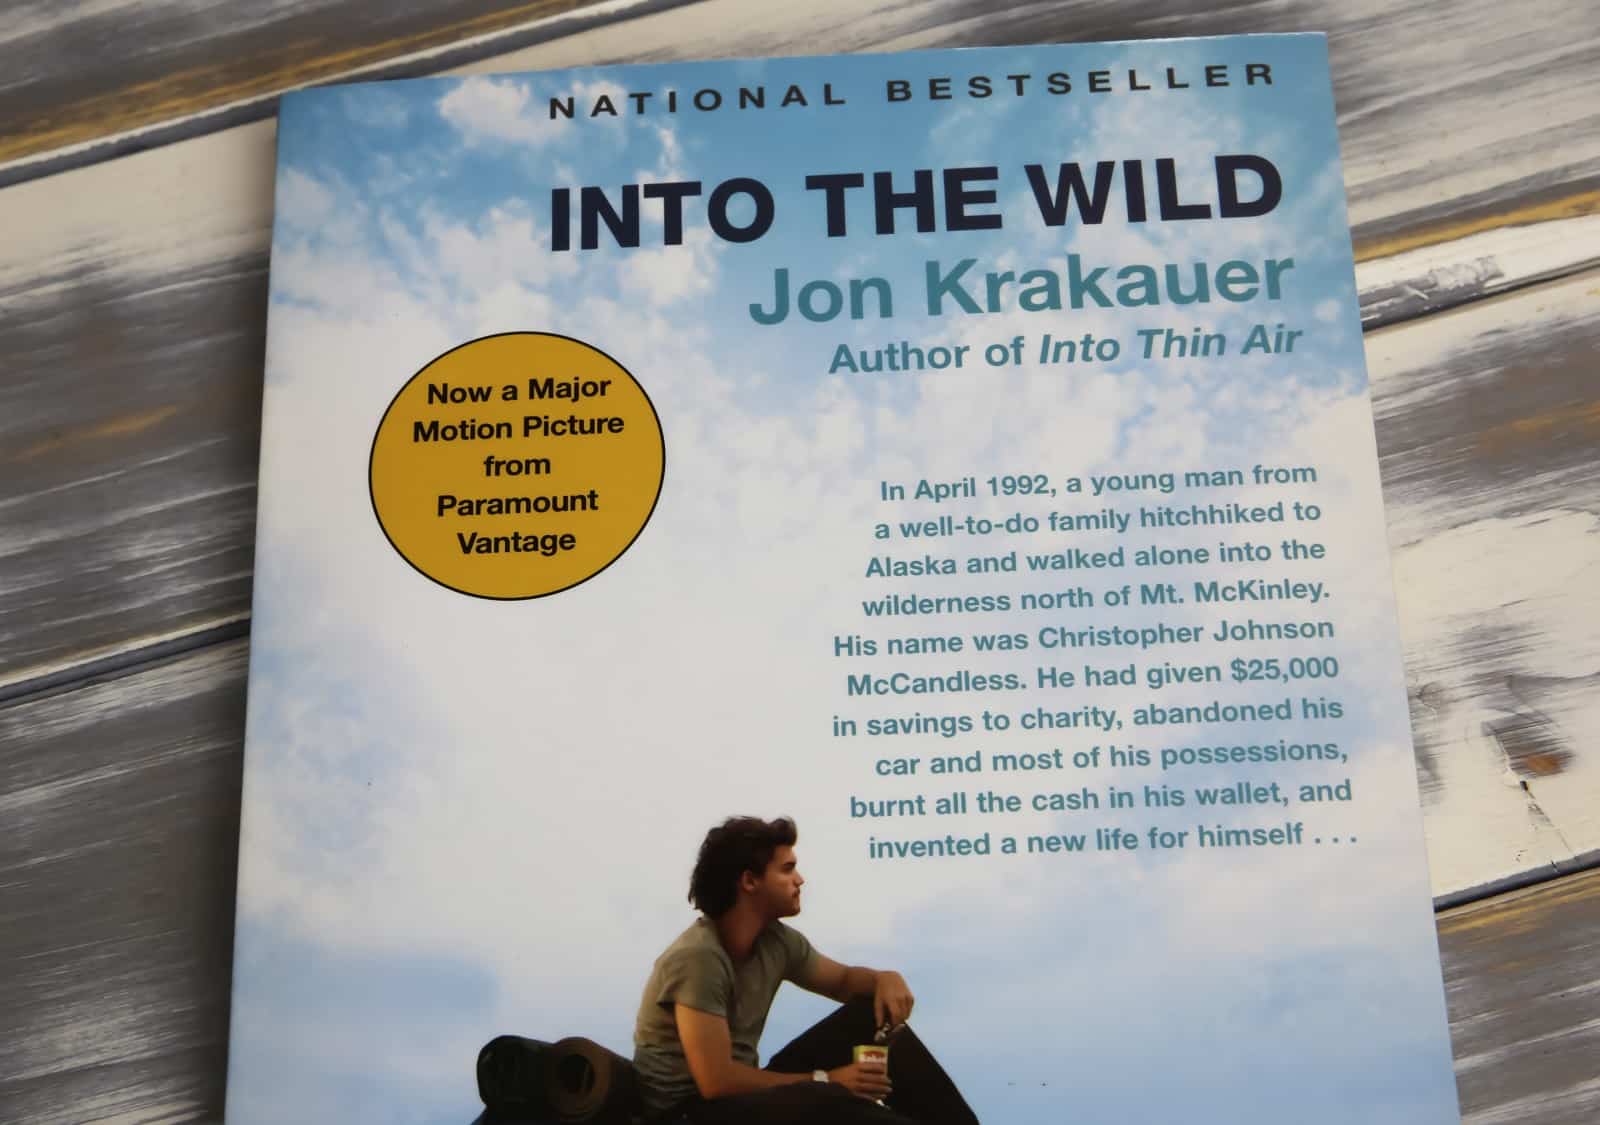 <p><span>Jon Krakauer’s “Into the Wild” tells the true story of Christopher McCandless, a young man who abandoned his possessions and savings to explore the Alaskan wilderness. Krakauer retraces McCandless’s journey, examining his motivations and the allure of a solitary life in nature.</span></p> <p><span>The book is a compelling and tragic tale of adventure, idealism, and the harsh realities of wilderness survival. It raises profound questions about the pursuit of freedom and the cost of abandoning society. </span></p> <p><b>Insider’s Tip: </b><span>After reading, consider exploring more about the balance between solitude and society and how travel can impact this balance.</span></p>